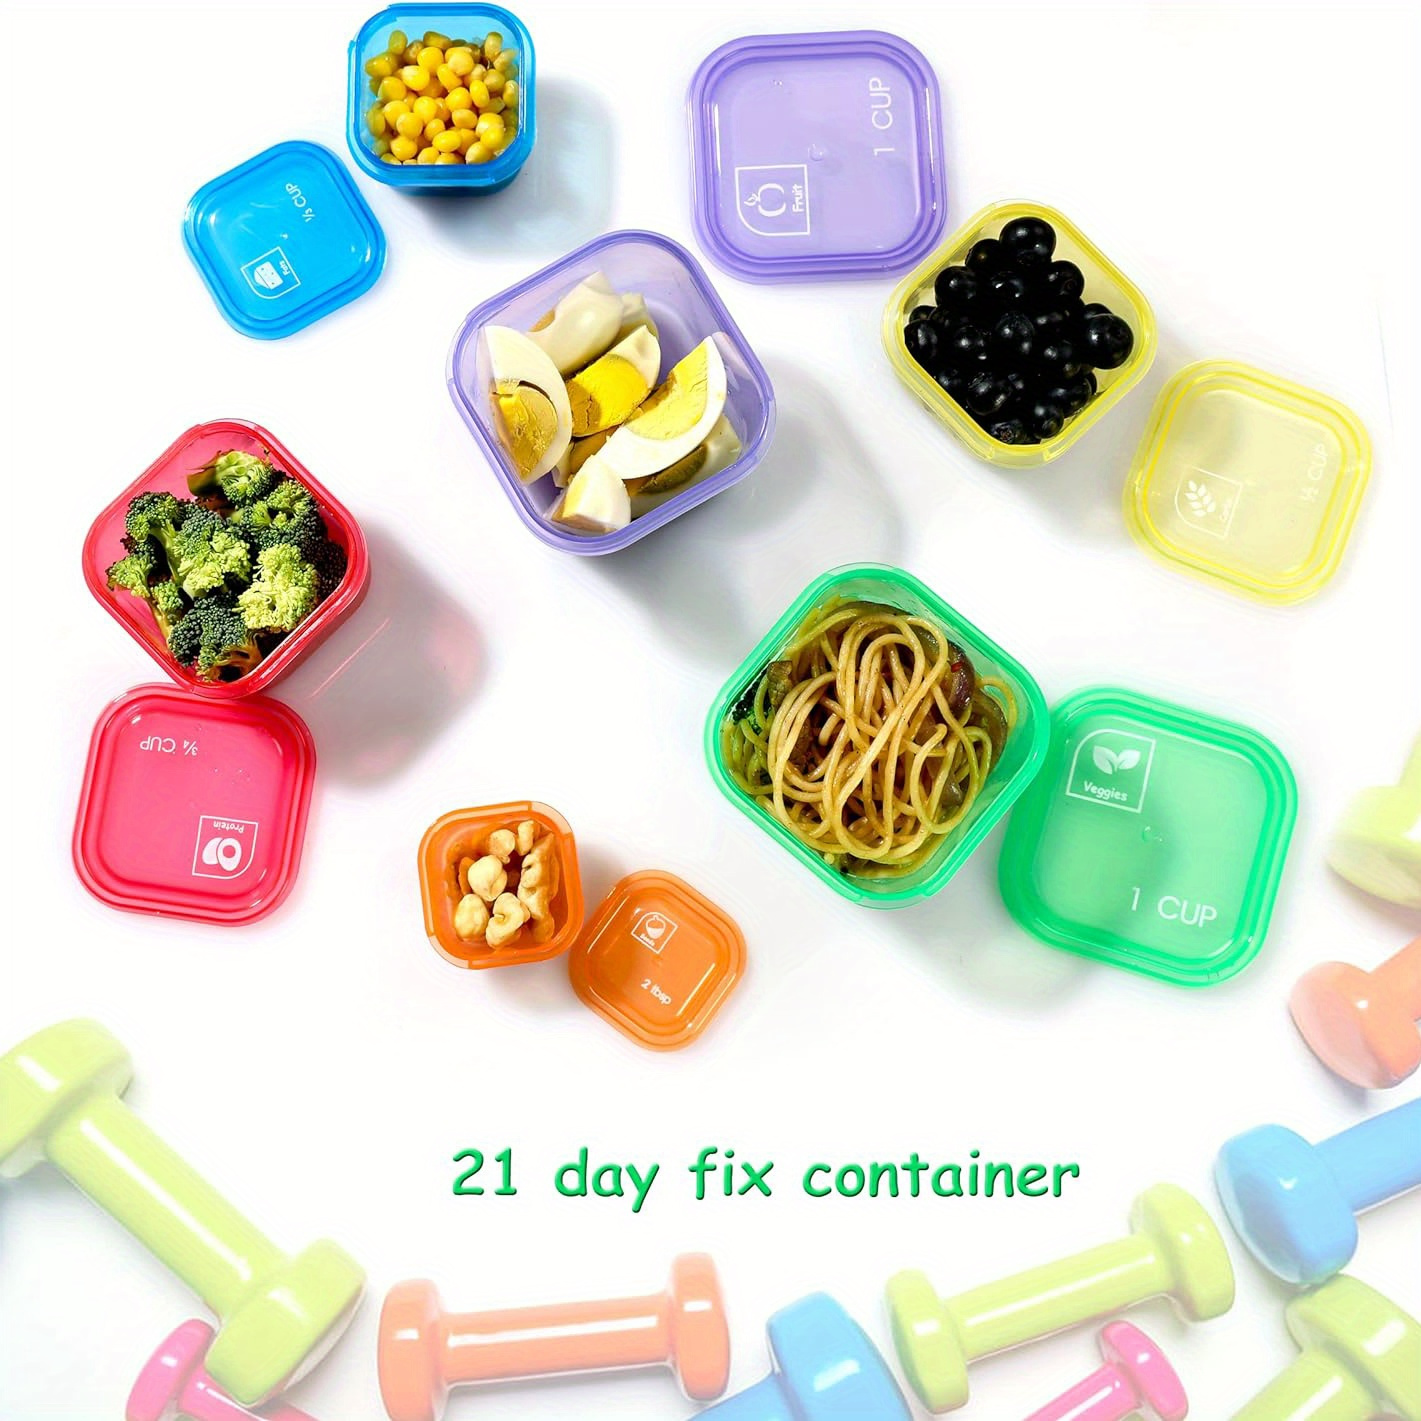 Portion Control Container and Food Plan - 21 Day Portion Control Container  Kit for Weight Loss - 21 Day Tally Chart with e-Book (7 Labeled Pcs)